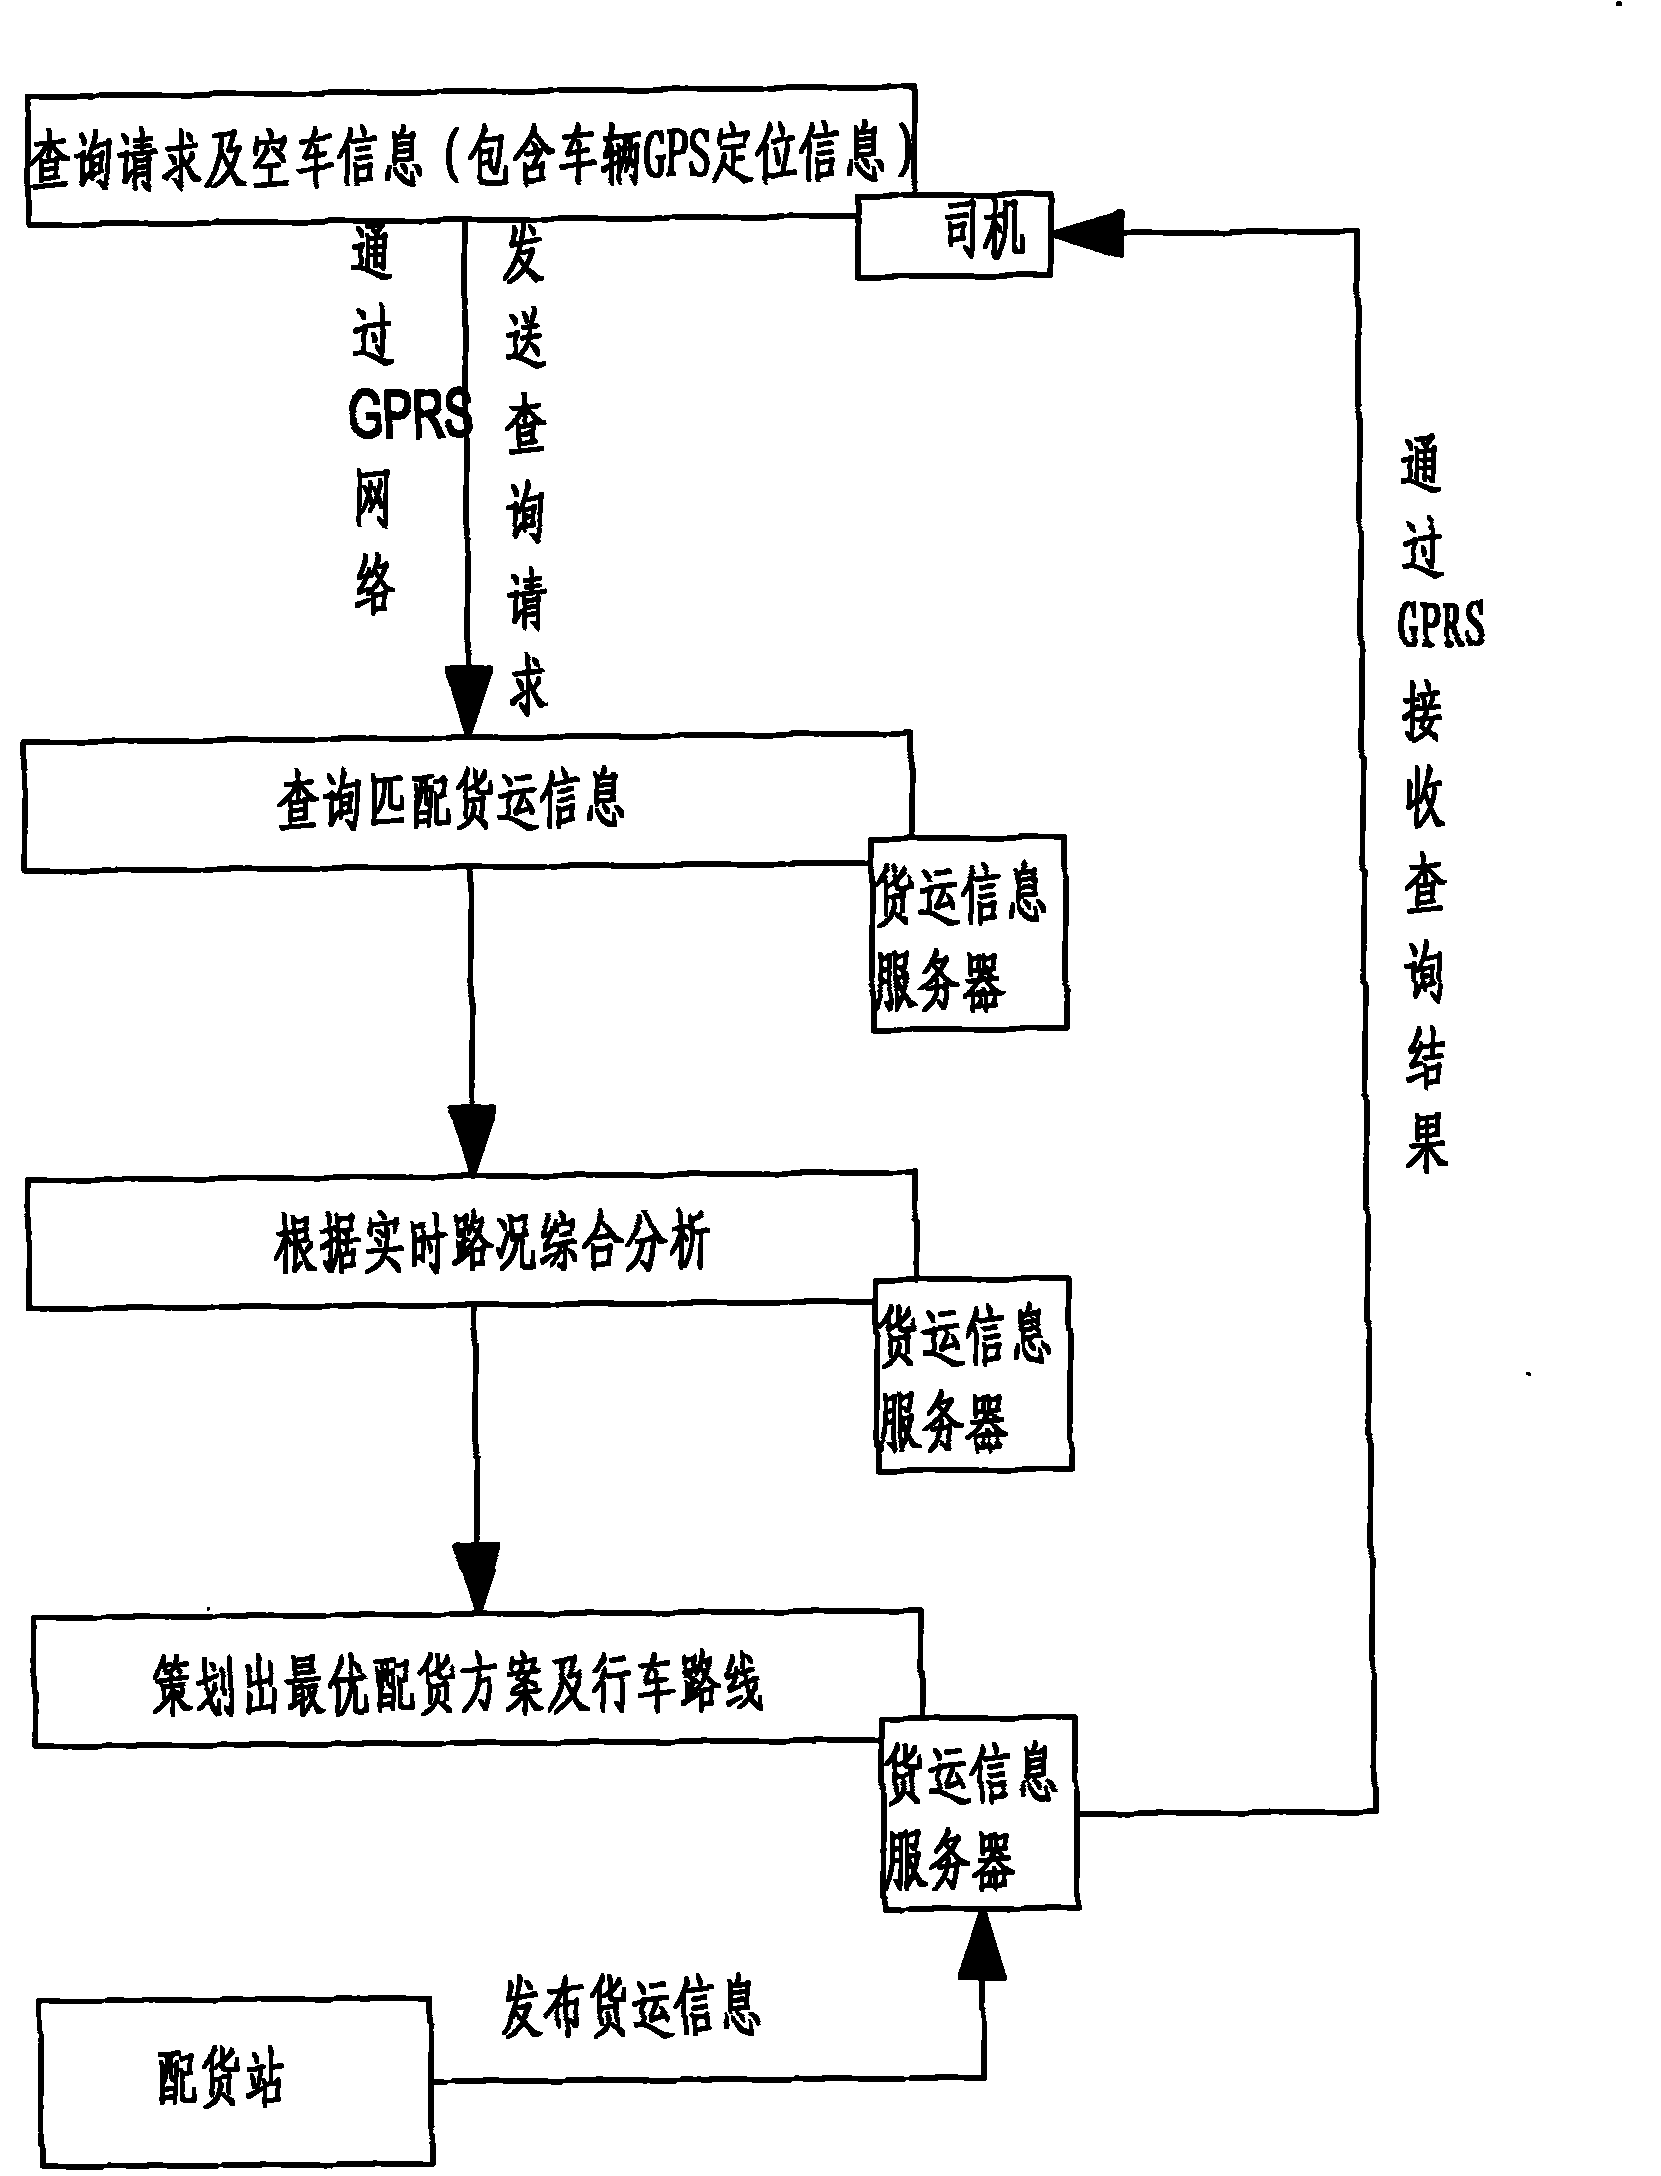 Cargo allocation method for implementing logistic transportation by utilizing GPS positioning